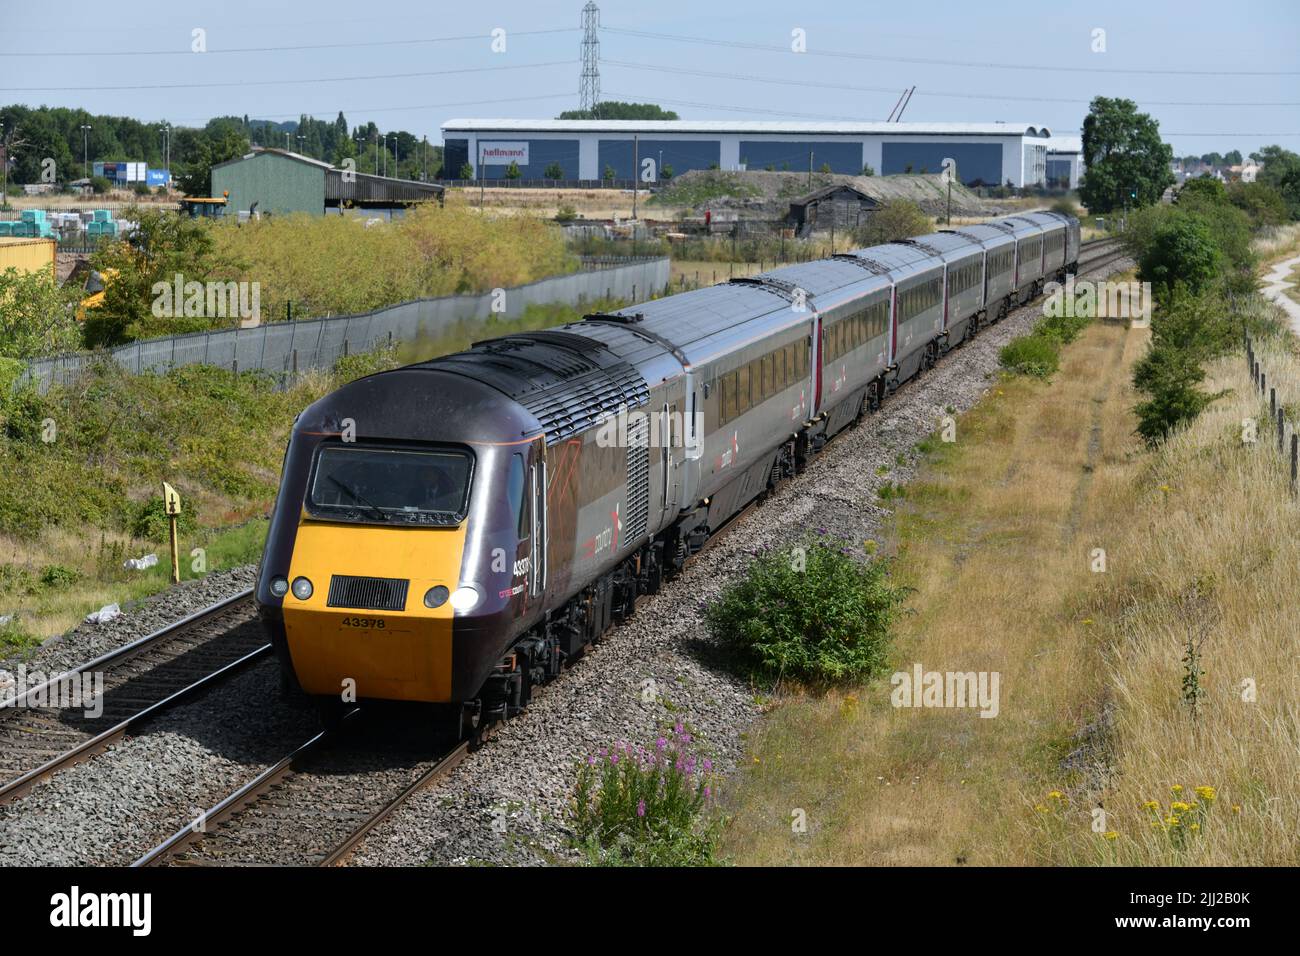 An Edinburgh to Plymouth Arriva Crosscountry 125mph High Speed Train passing through Barton Under Needwood, Staffordshire on 11 July 2022 Stock Photo